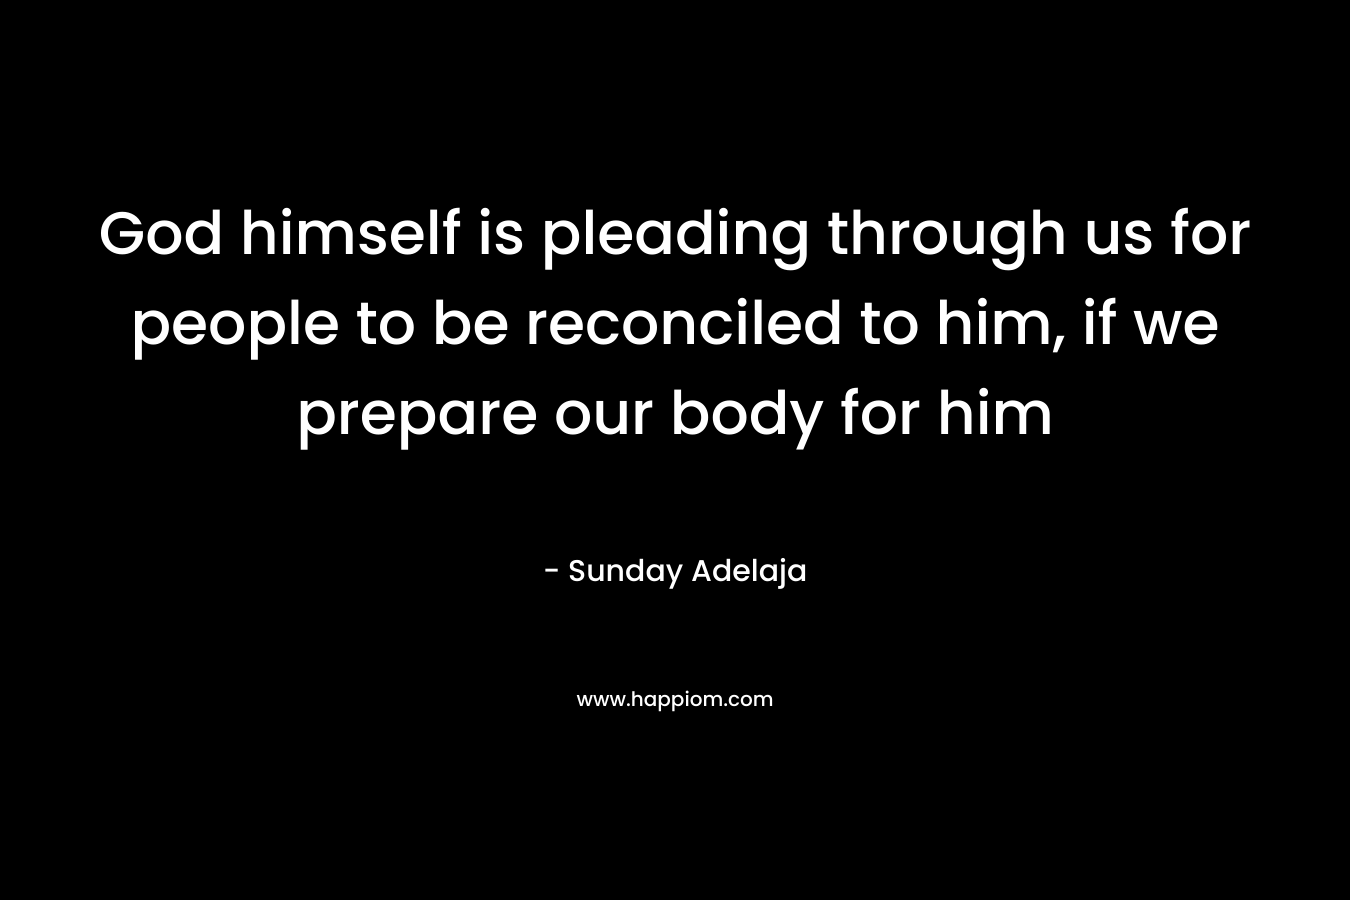 God himself is pleading through us for people to be reconciled to him, if we prepare our body for him